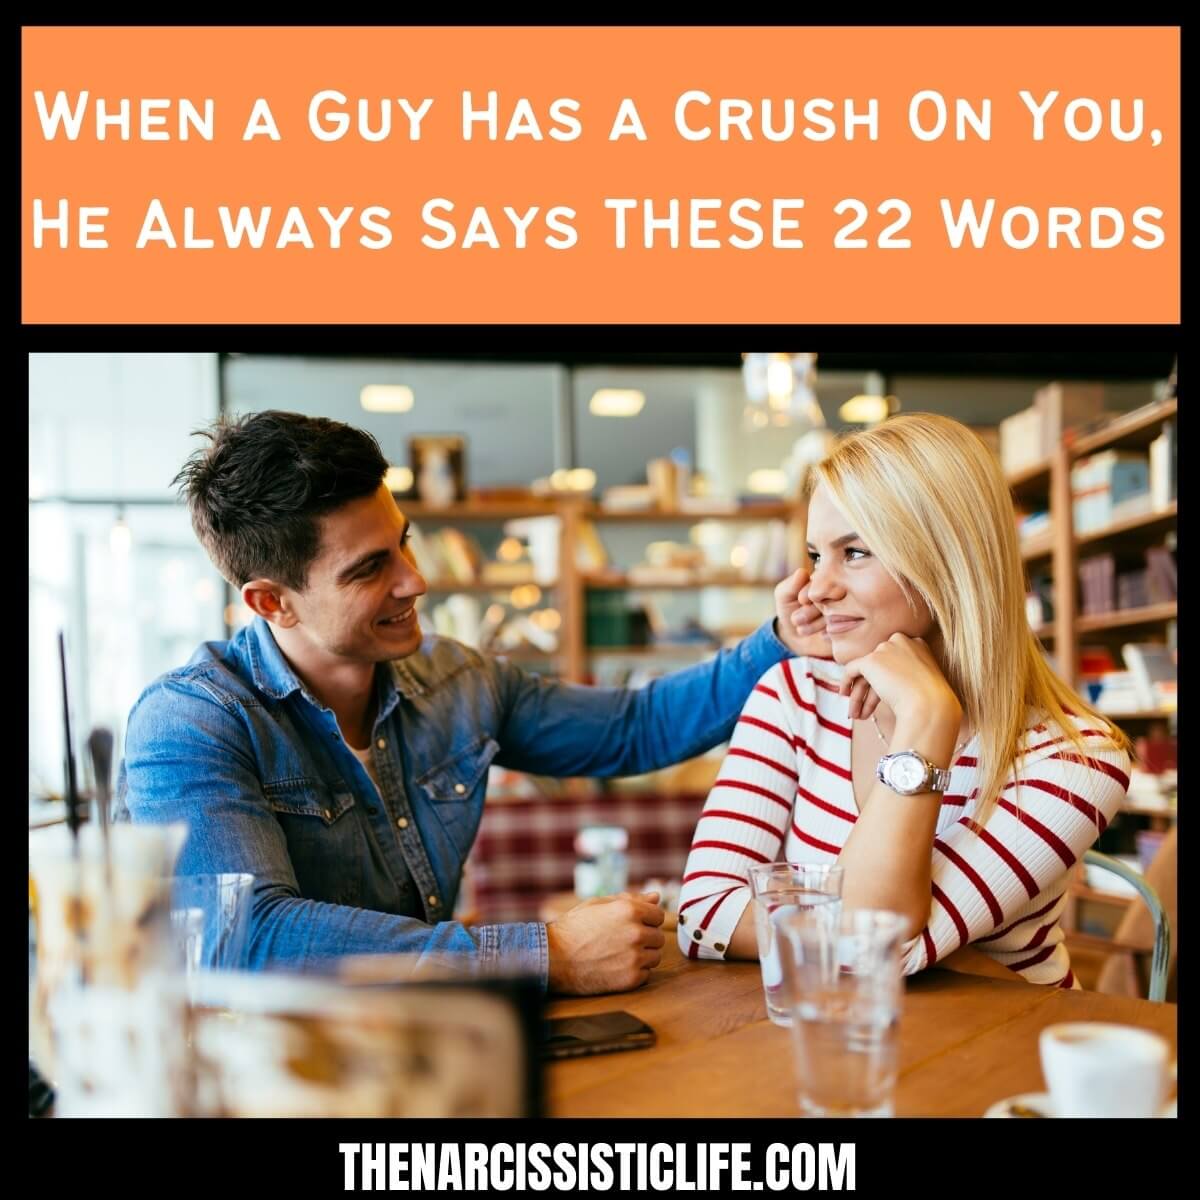 When a Guy Has a Crush On You, He Always Says THESE Words